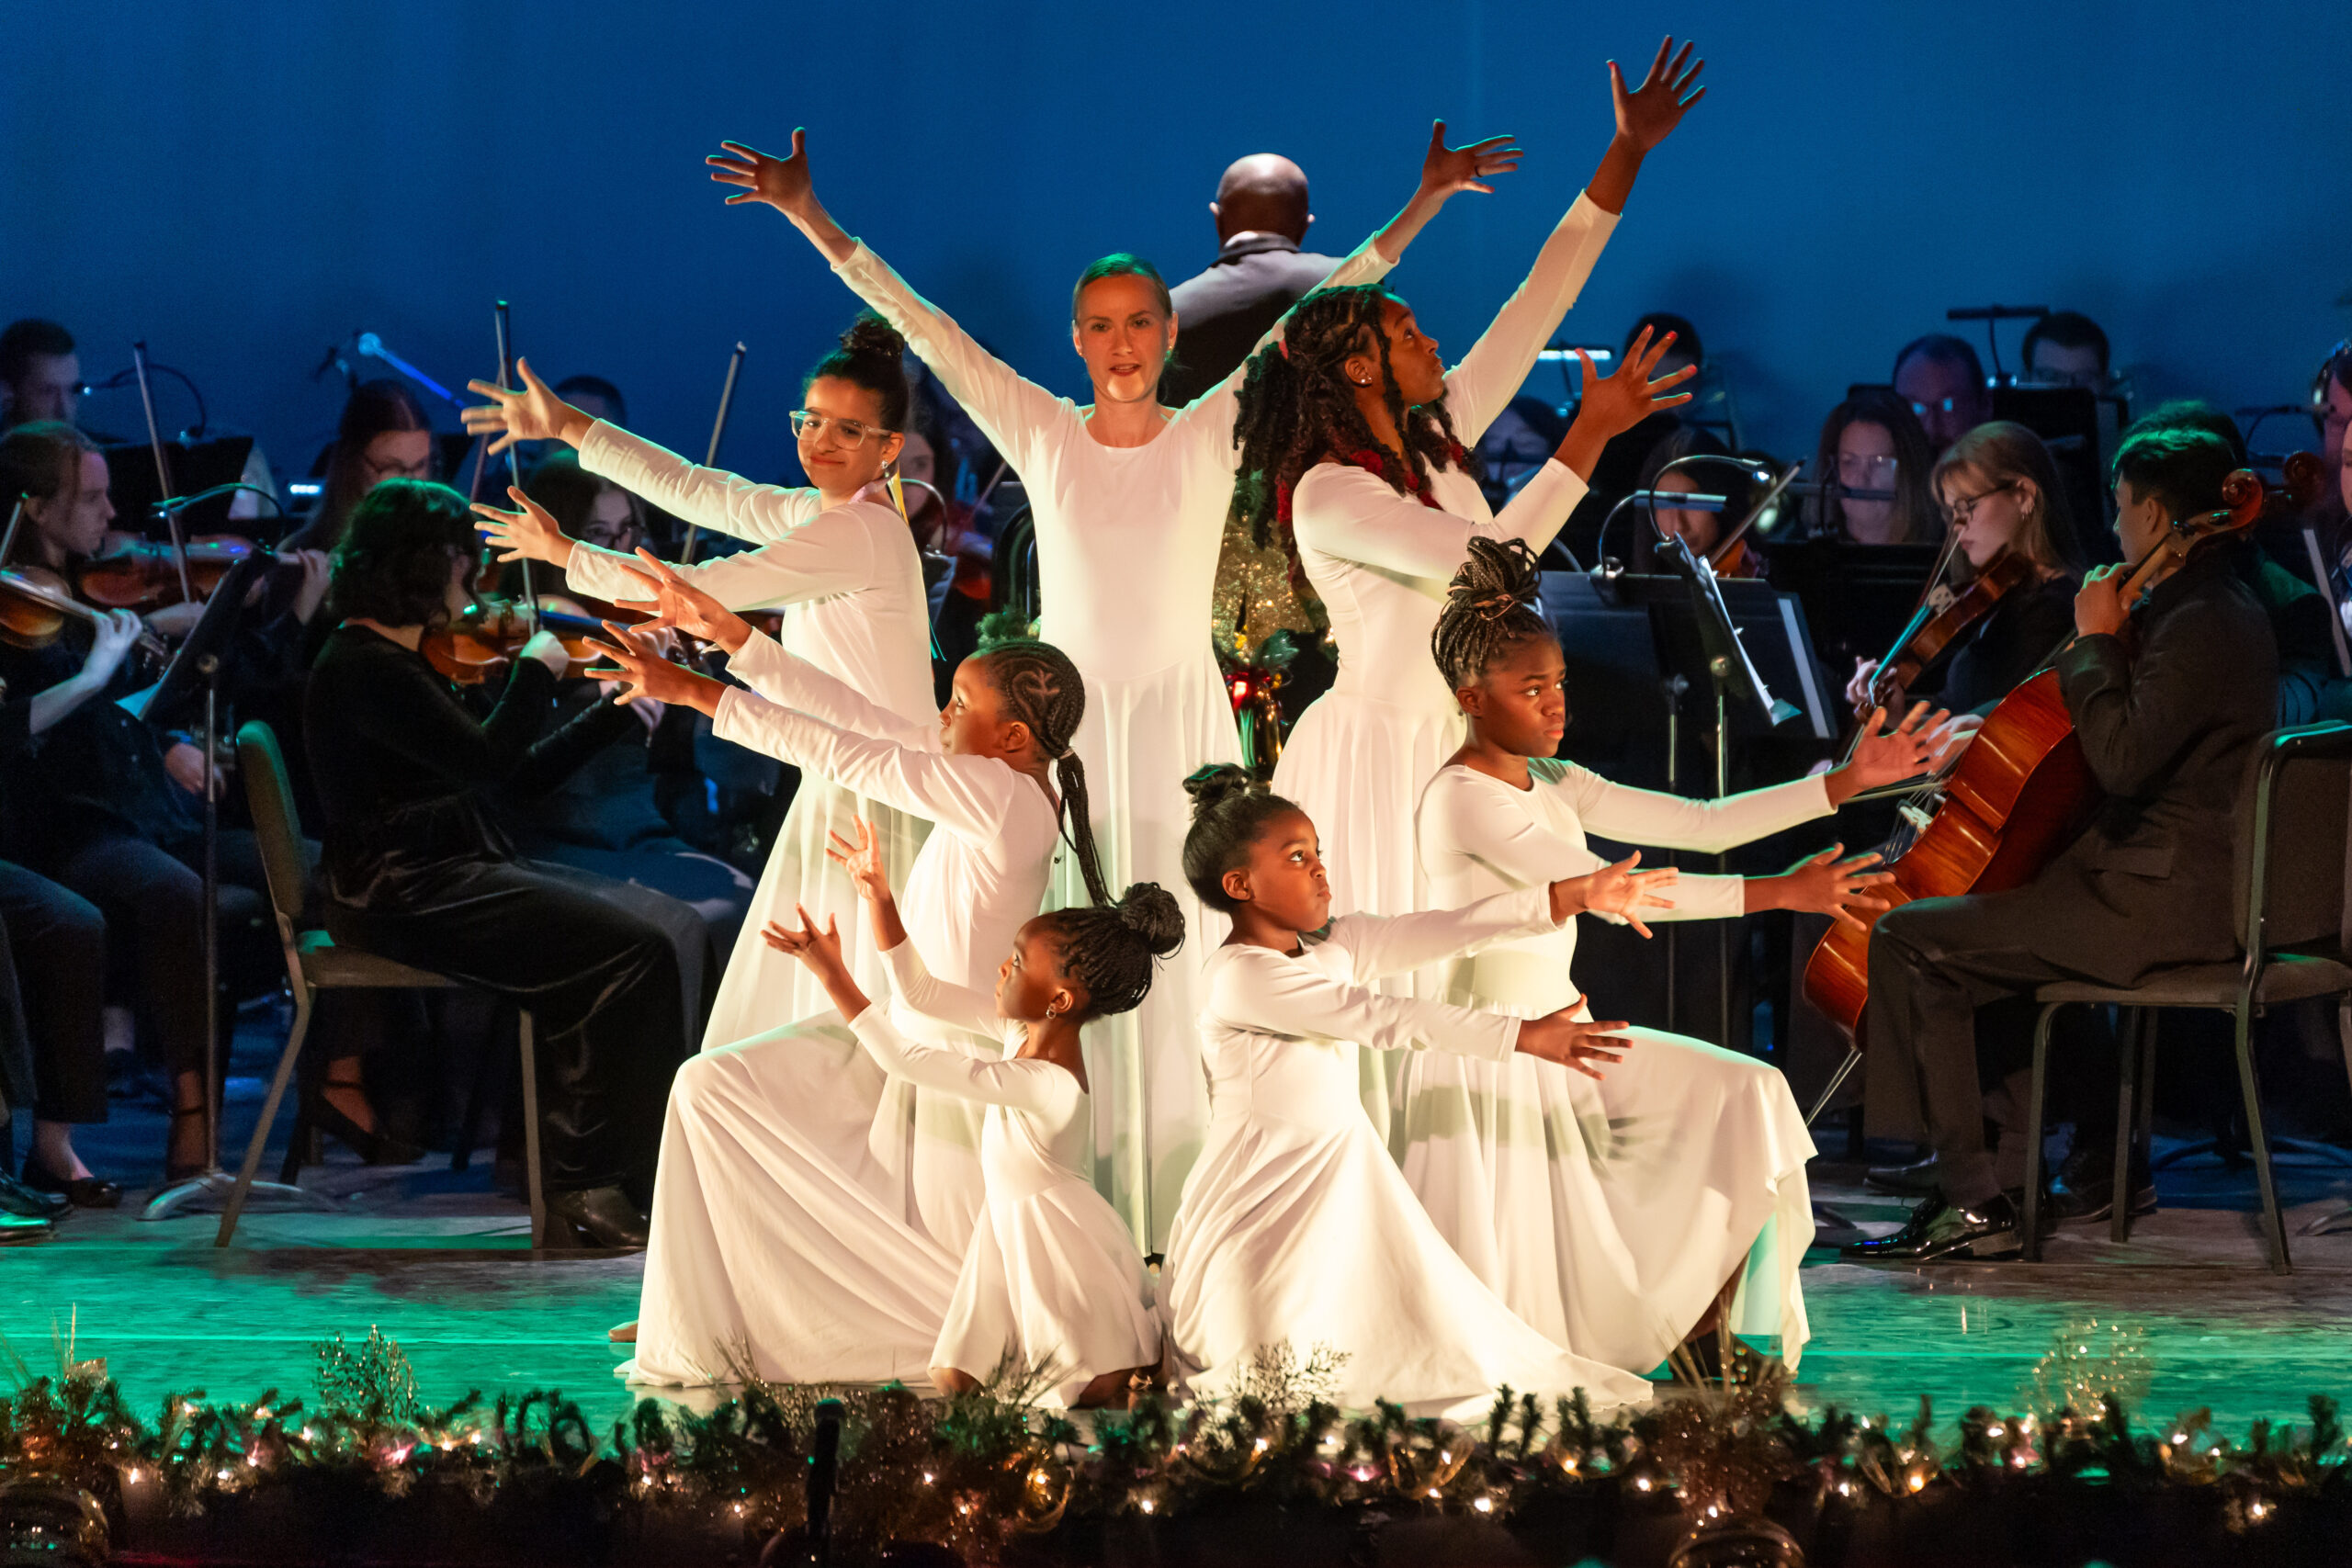 Dancers on stage at Christmas concert